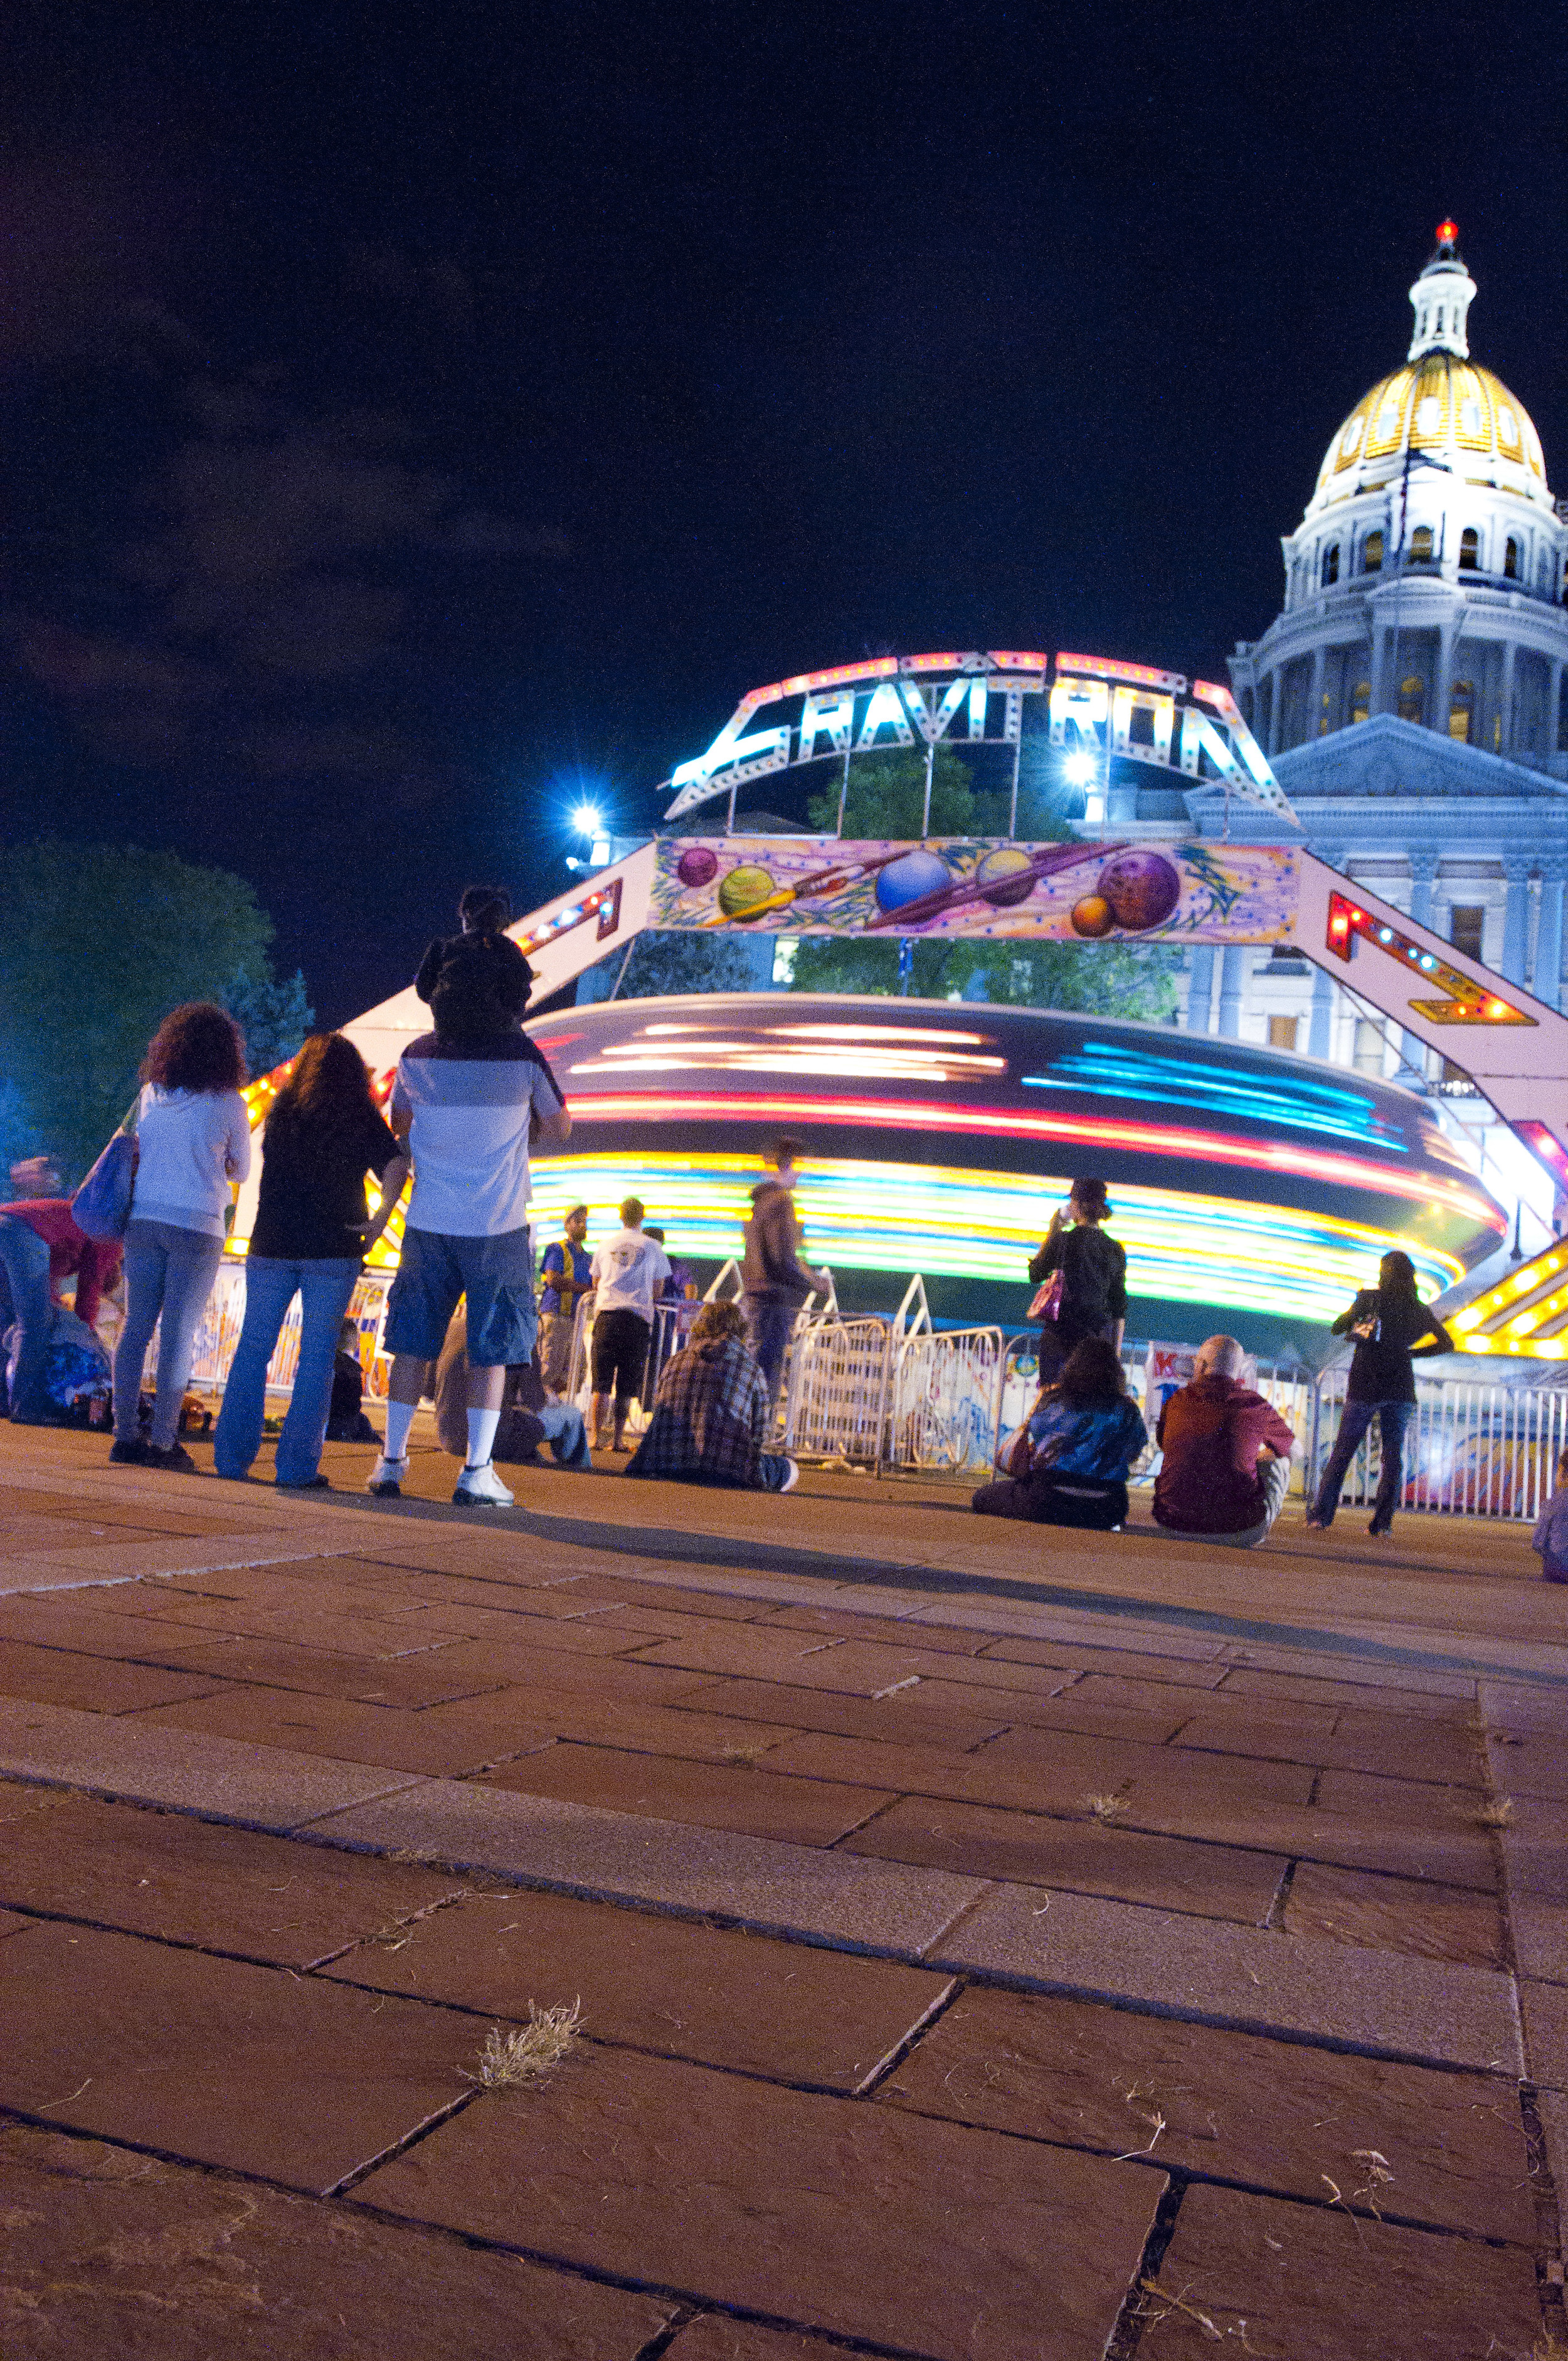  The Taste of Colorado winds down in front of the Colorado State Capitol as the festival's rides spin the last of their riders. The yearly festival brings huge crowds to Denver's heart over Labor Day weekend. 